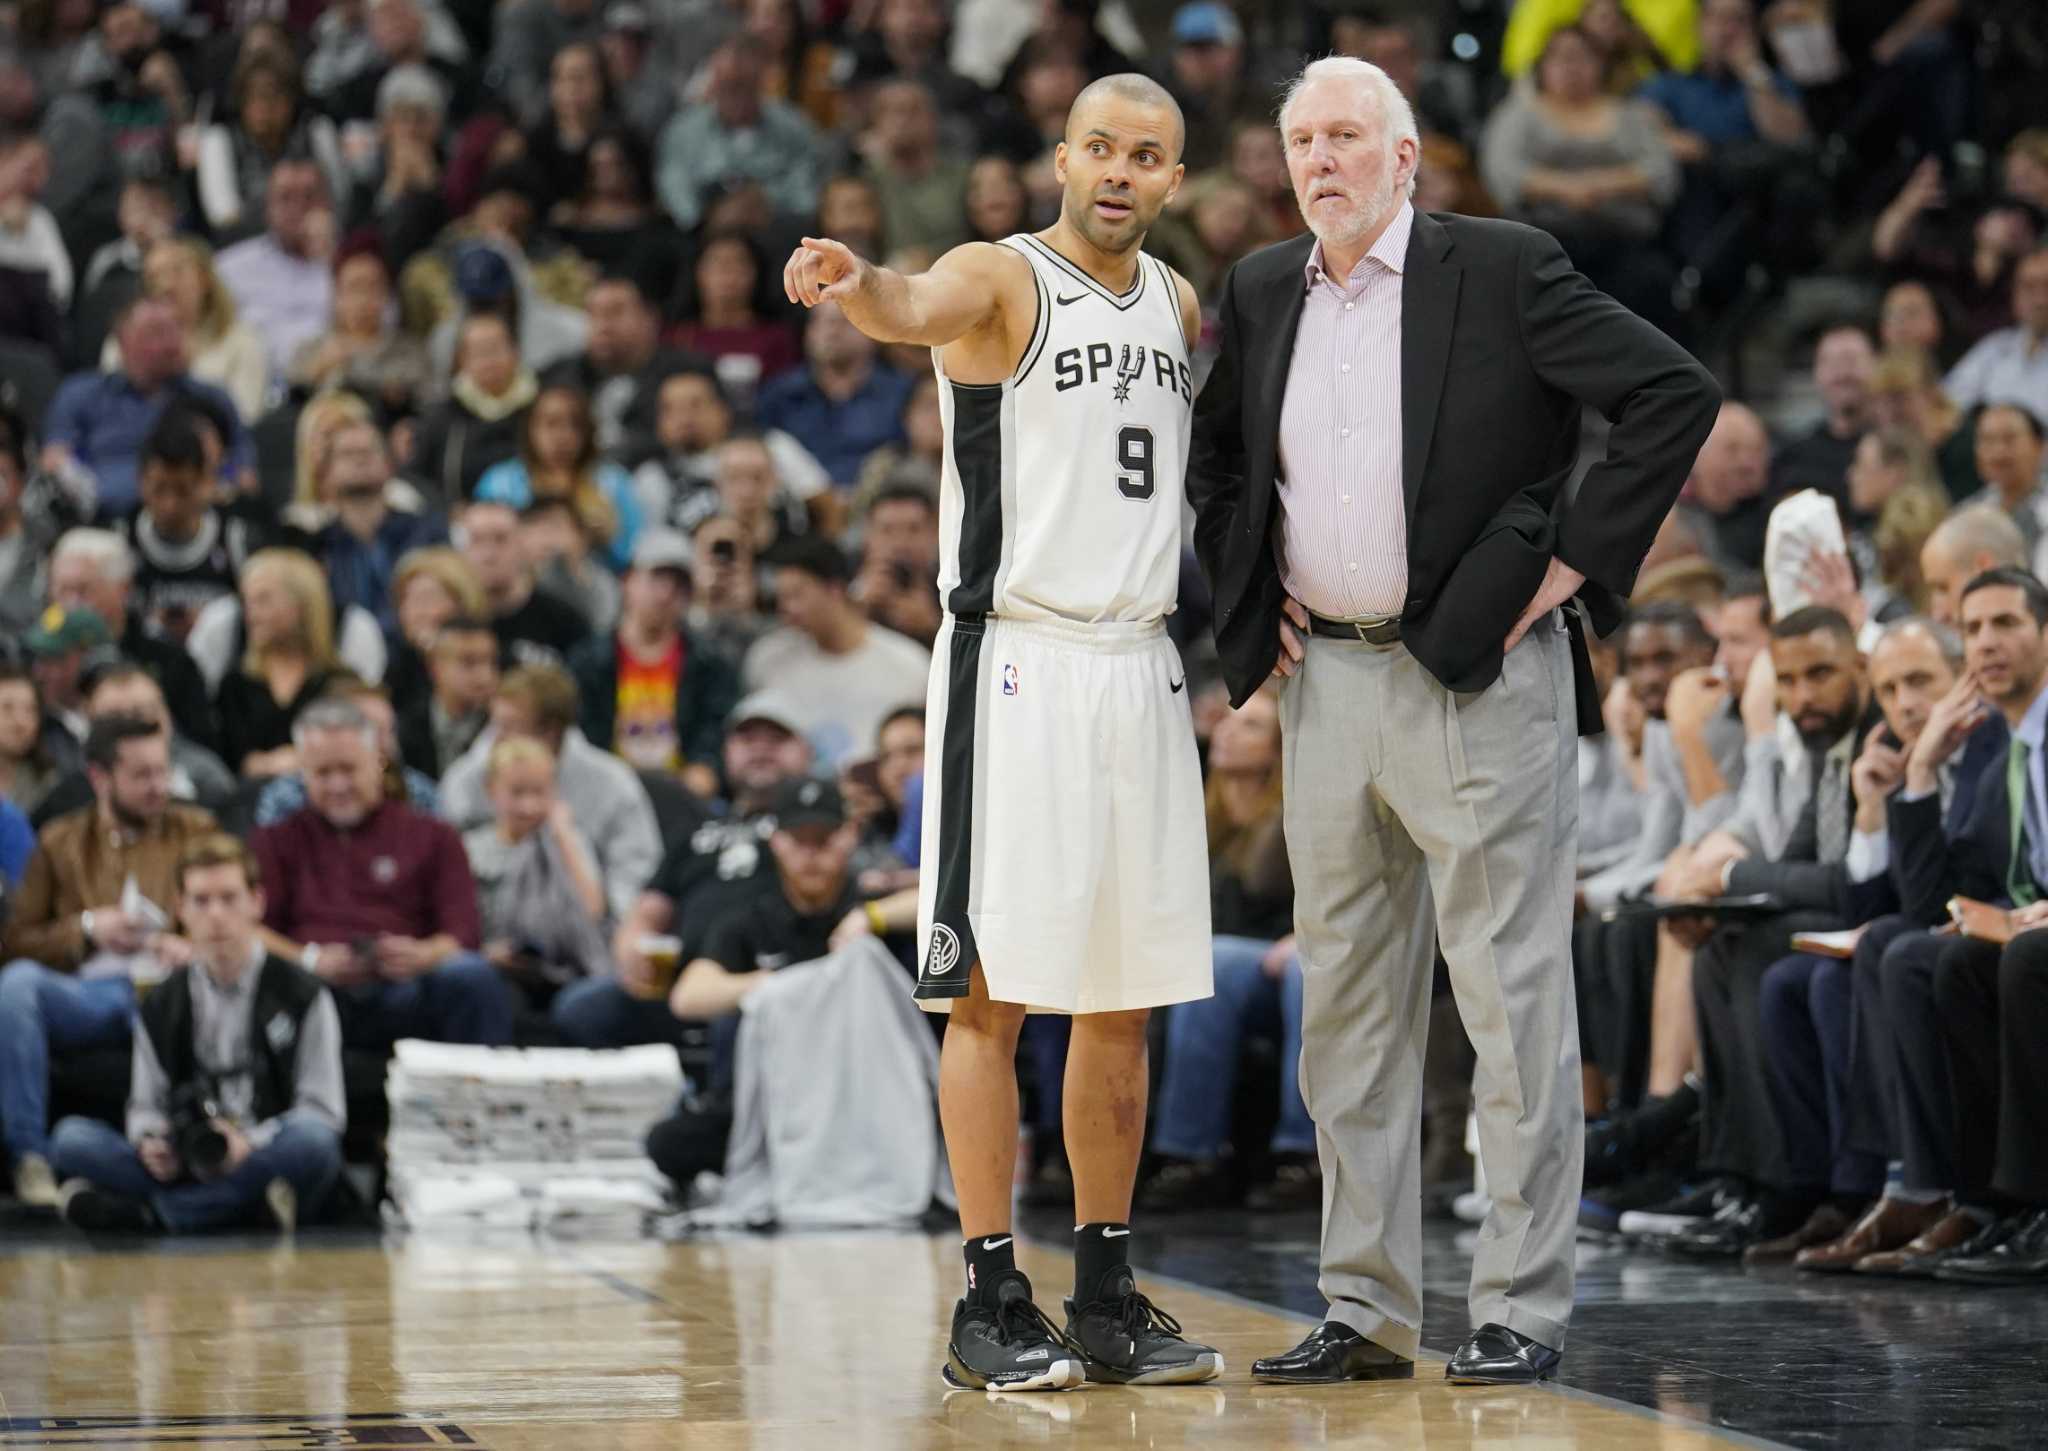 Why You Shouldn't Give Up On the Spurs – Trinitonian